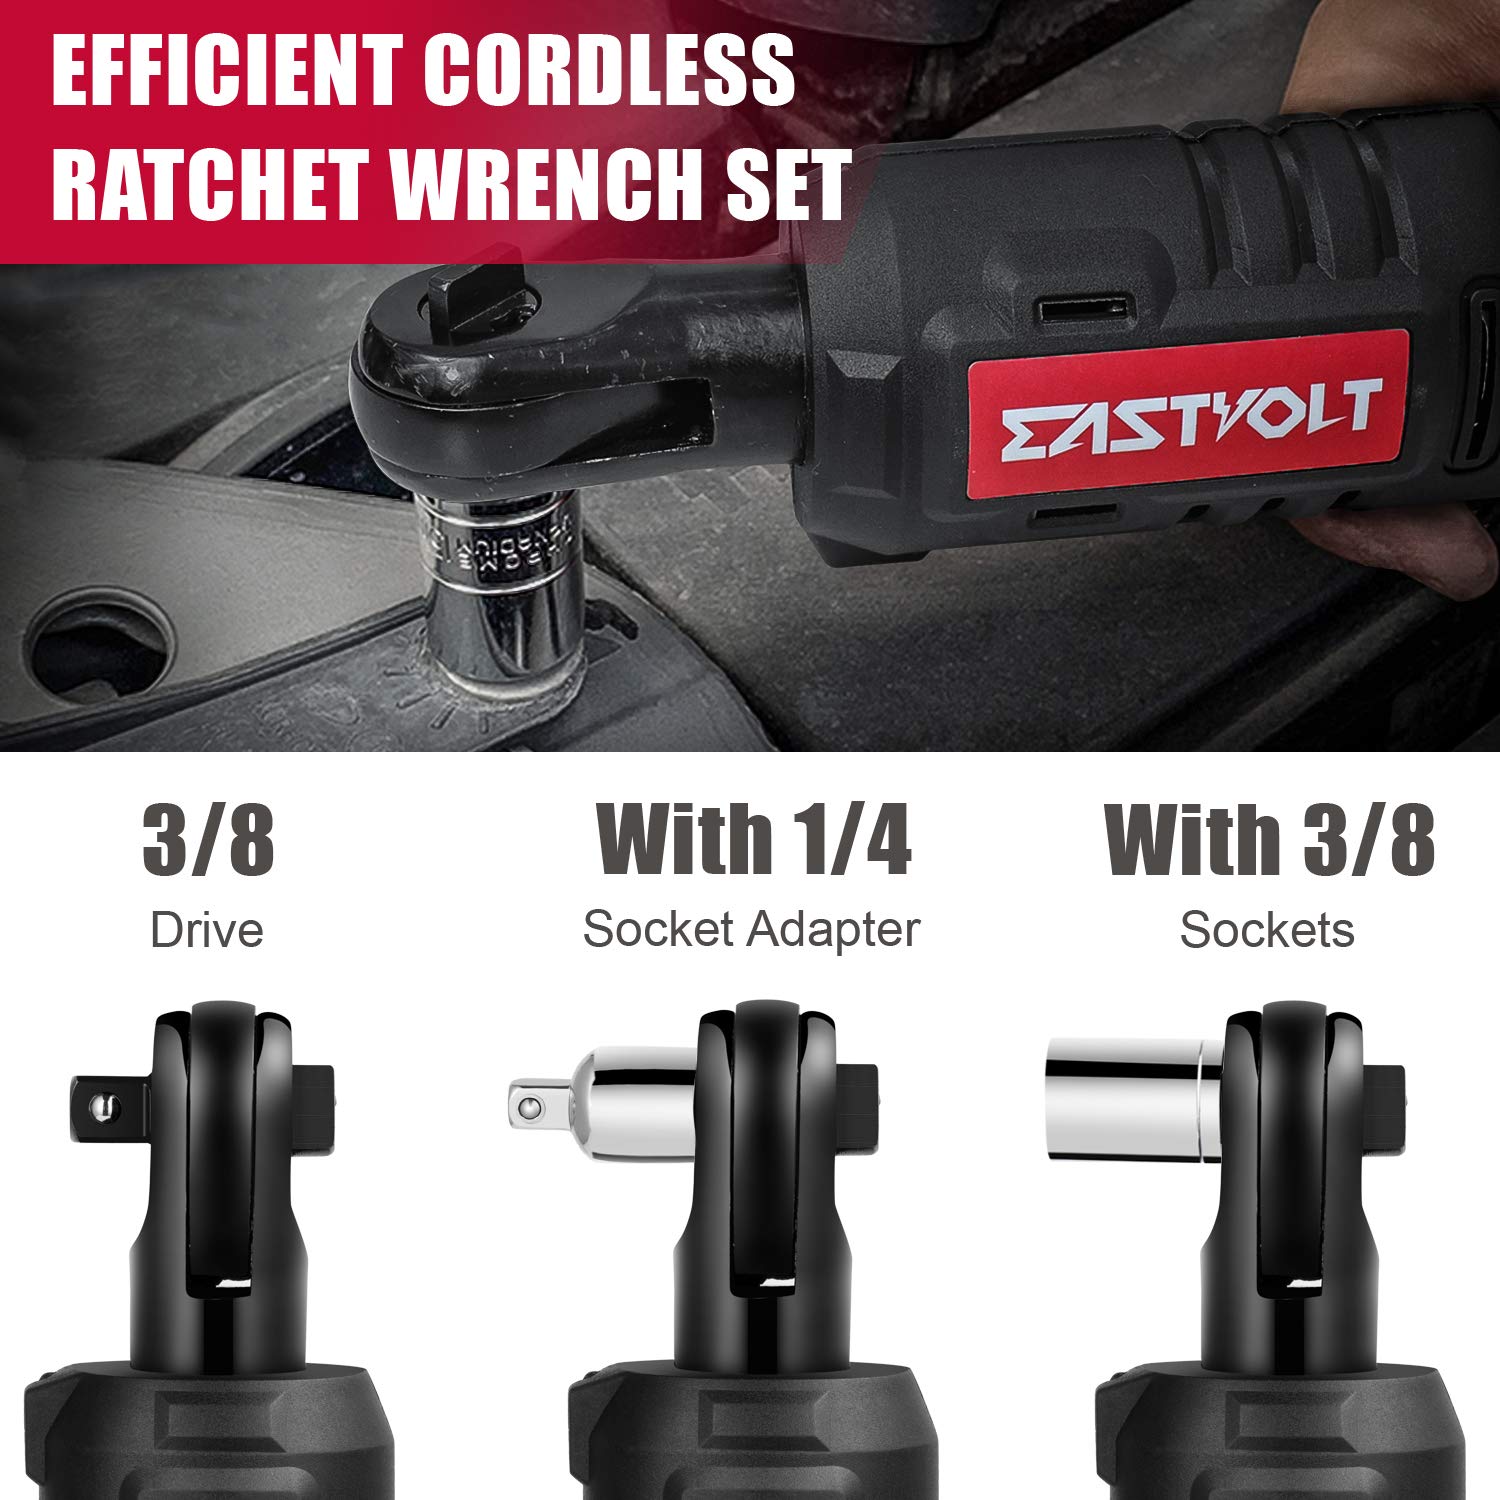 Eastvolt 12V Cordless Electric Ratchet Wrench Set, 3/8 Inch 35 Ft-lbs Power Wrench Tool Kit with Fast Charger, 2.0Ah Lithium-Ion Battery, 7-Pieces 3/8 Inch Metric Sockets and 1/4